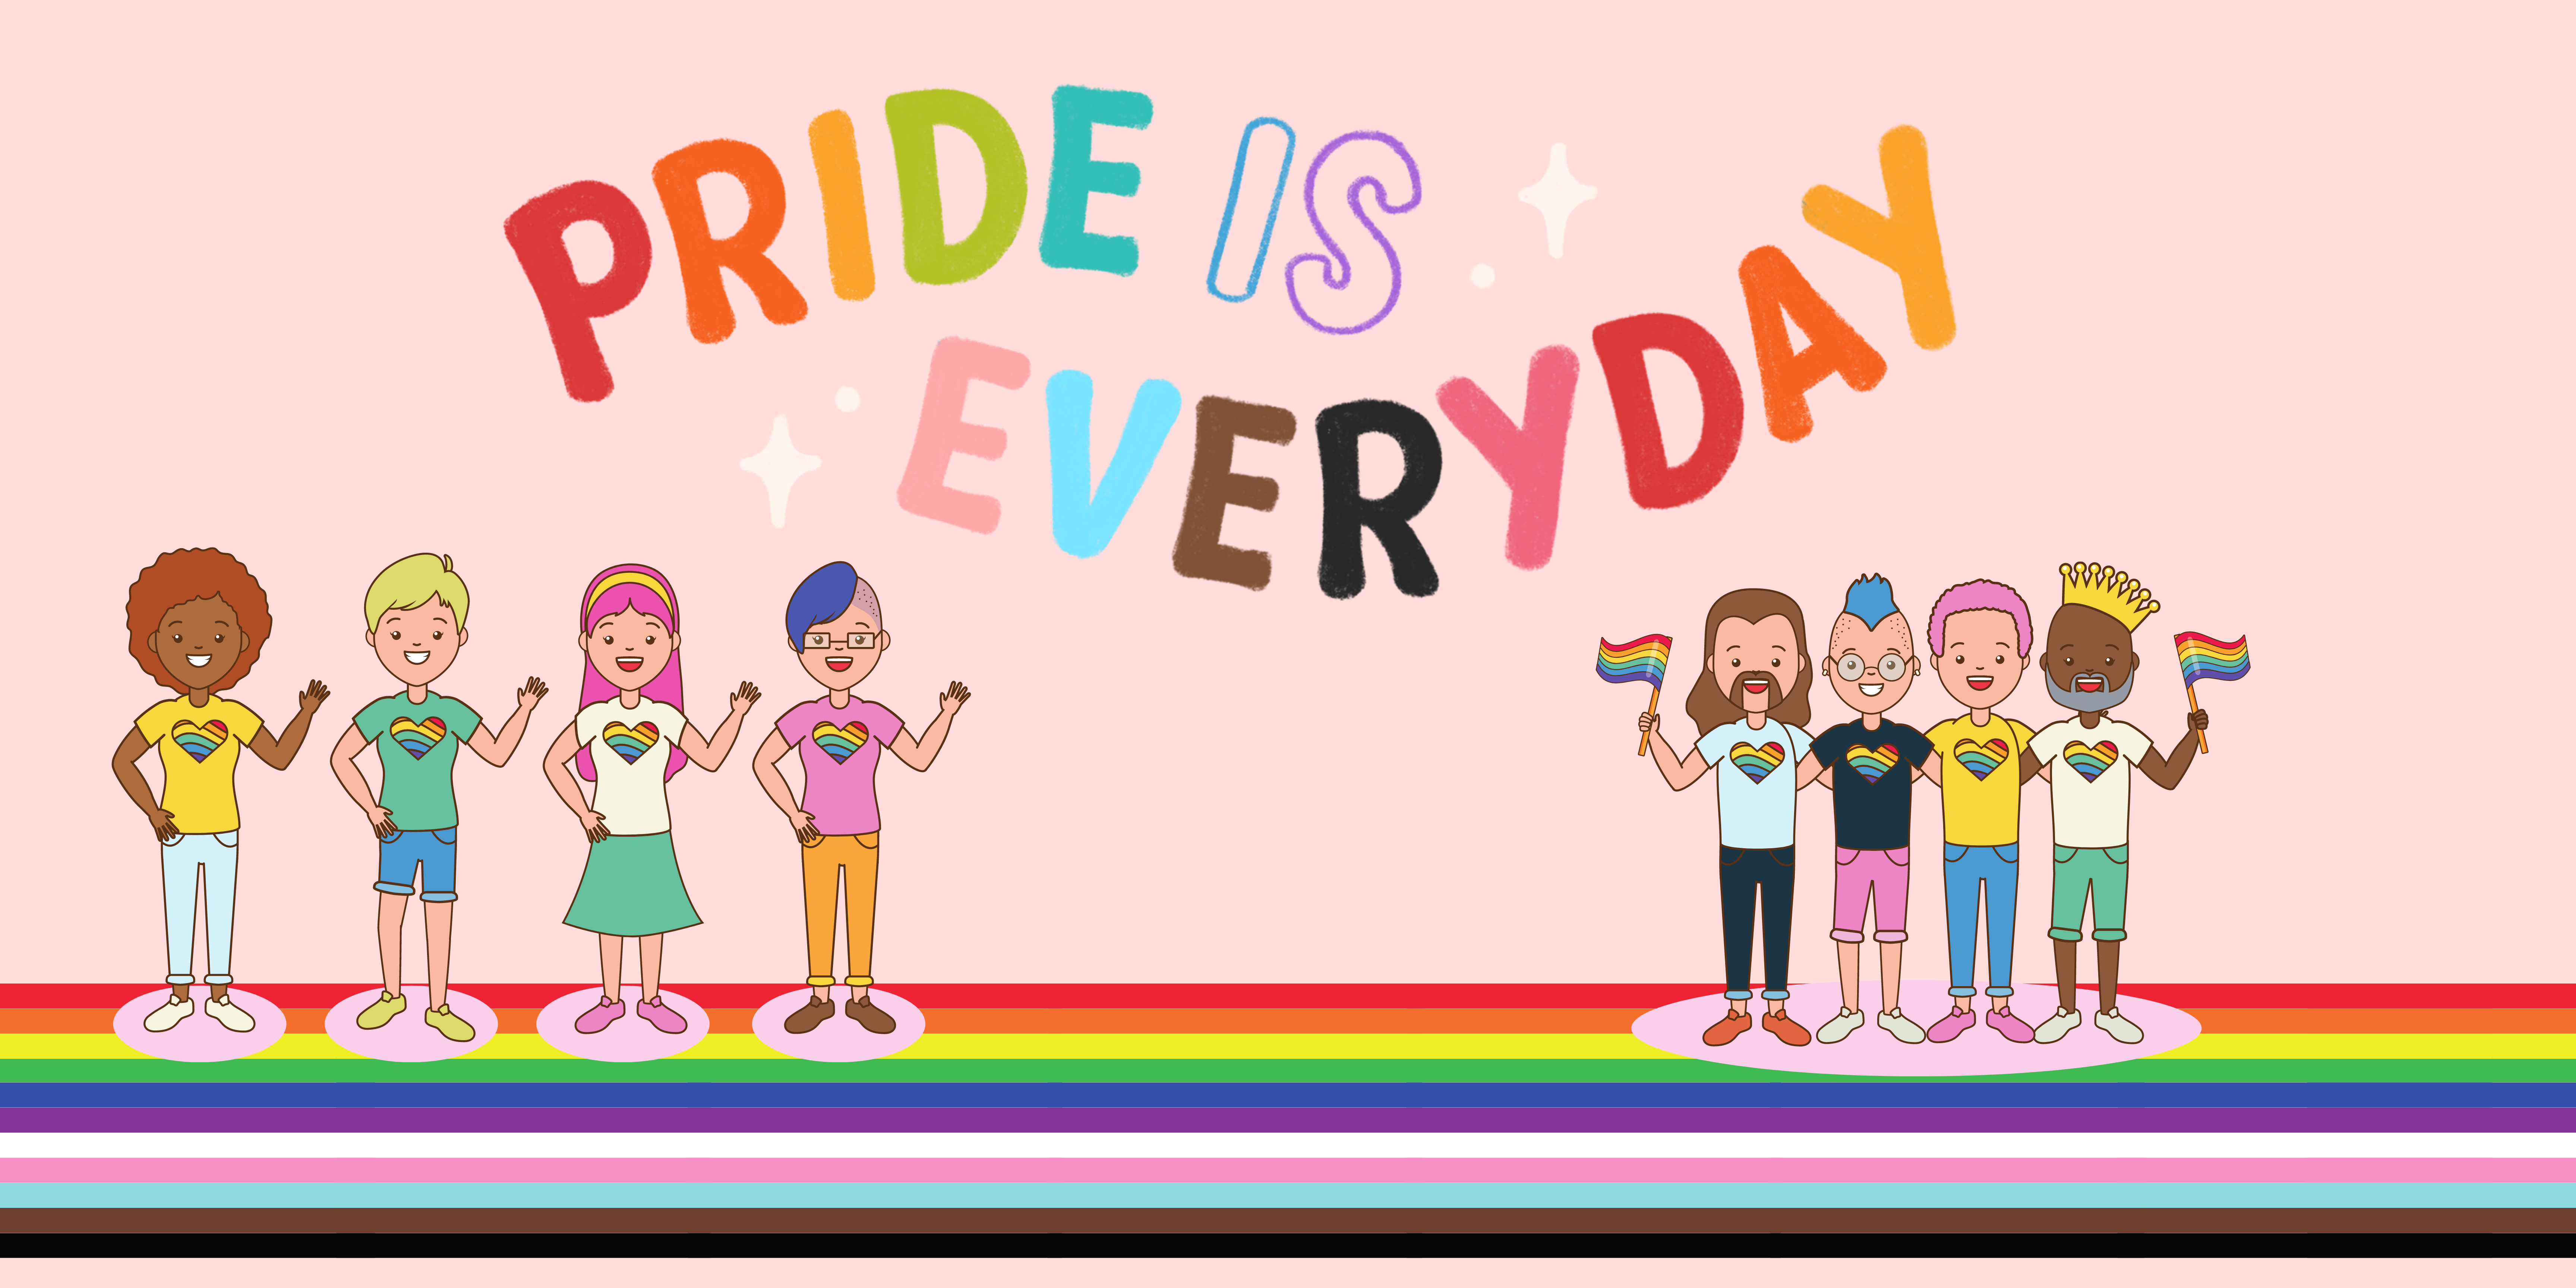 Queen of To Do - Pride is Everyday